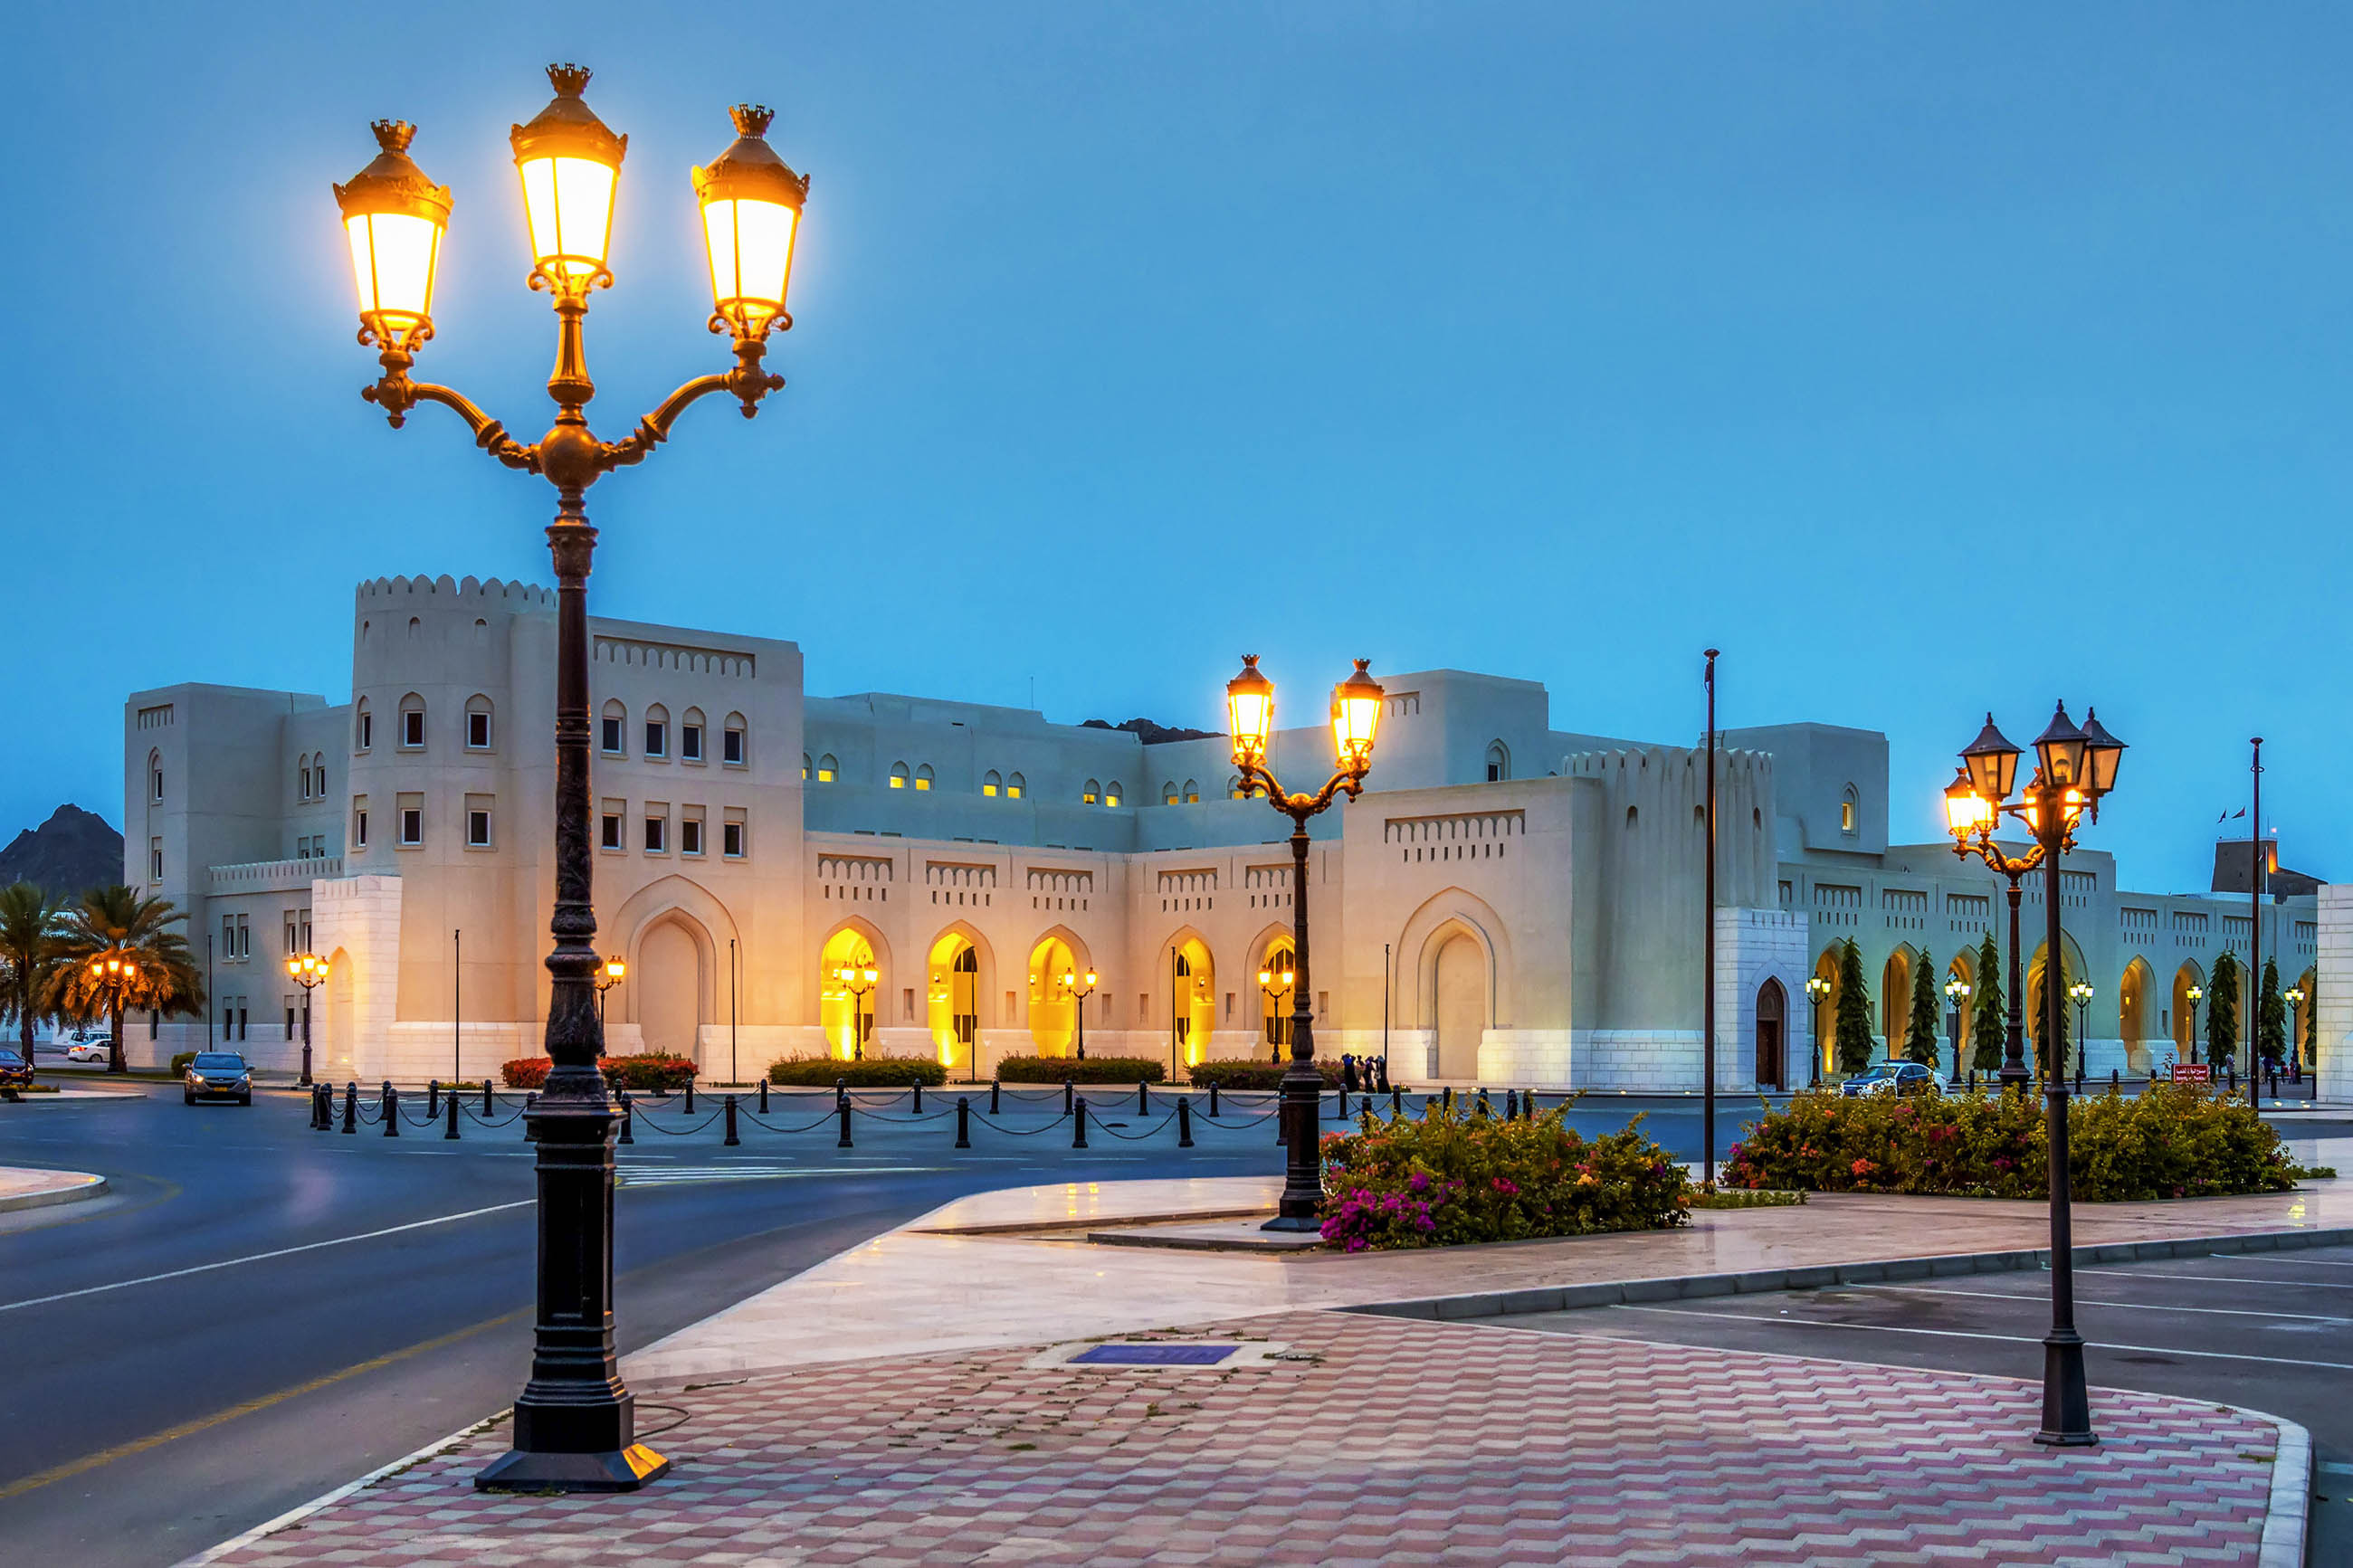 Old town charm, Muscat cityscape, Arabian architecture, Travel photography, 2600x1740 HD Desktop